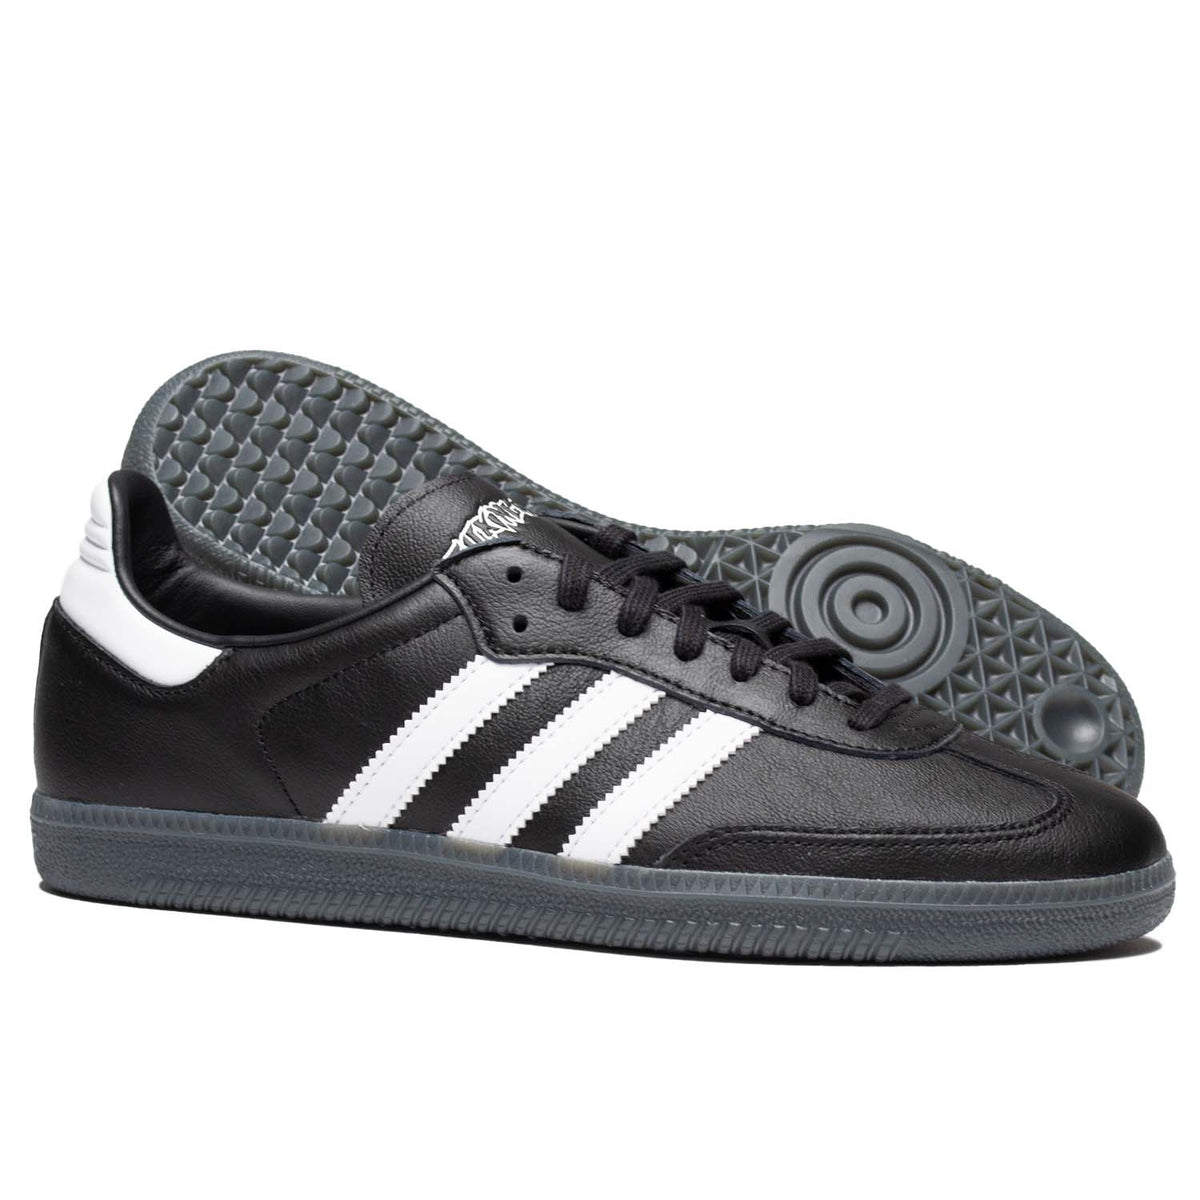 Adidas and Fucking Awesome Samba in black leather with white leather stripes and clear sole.